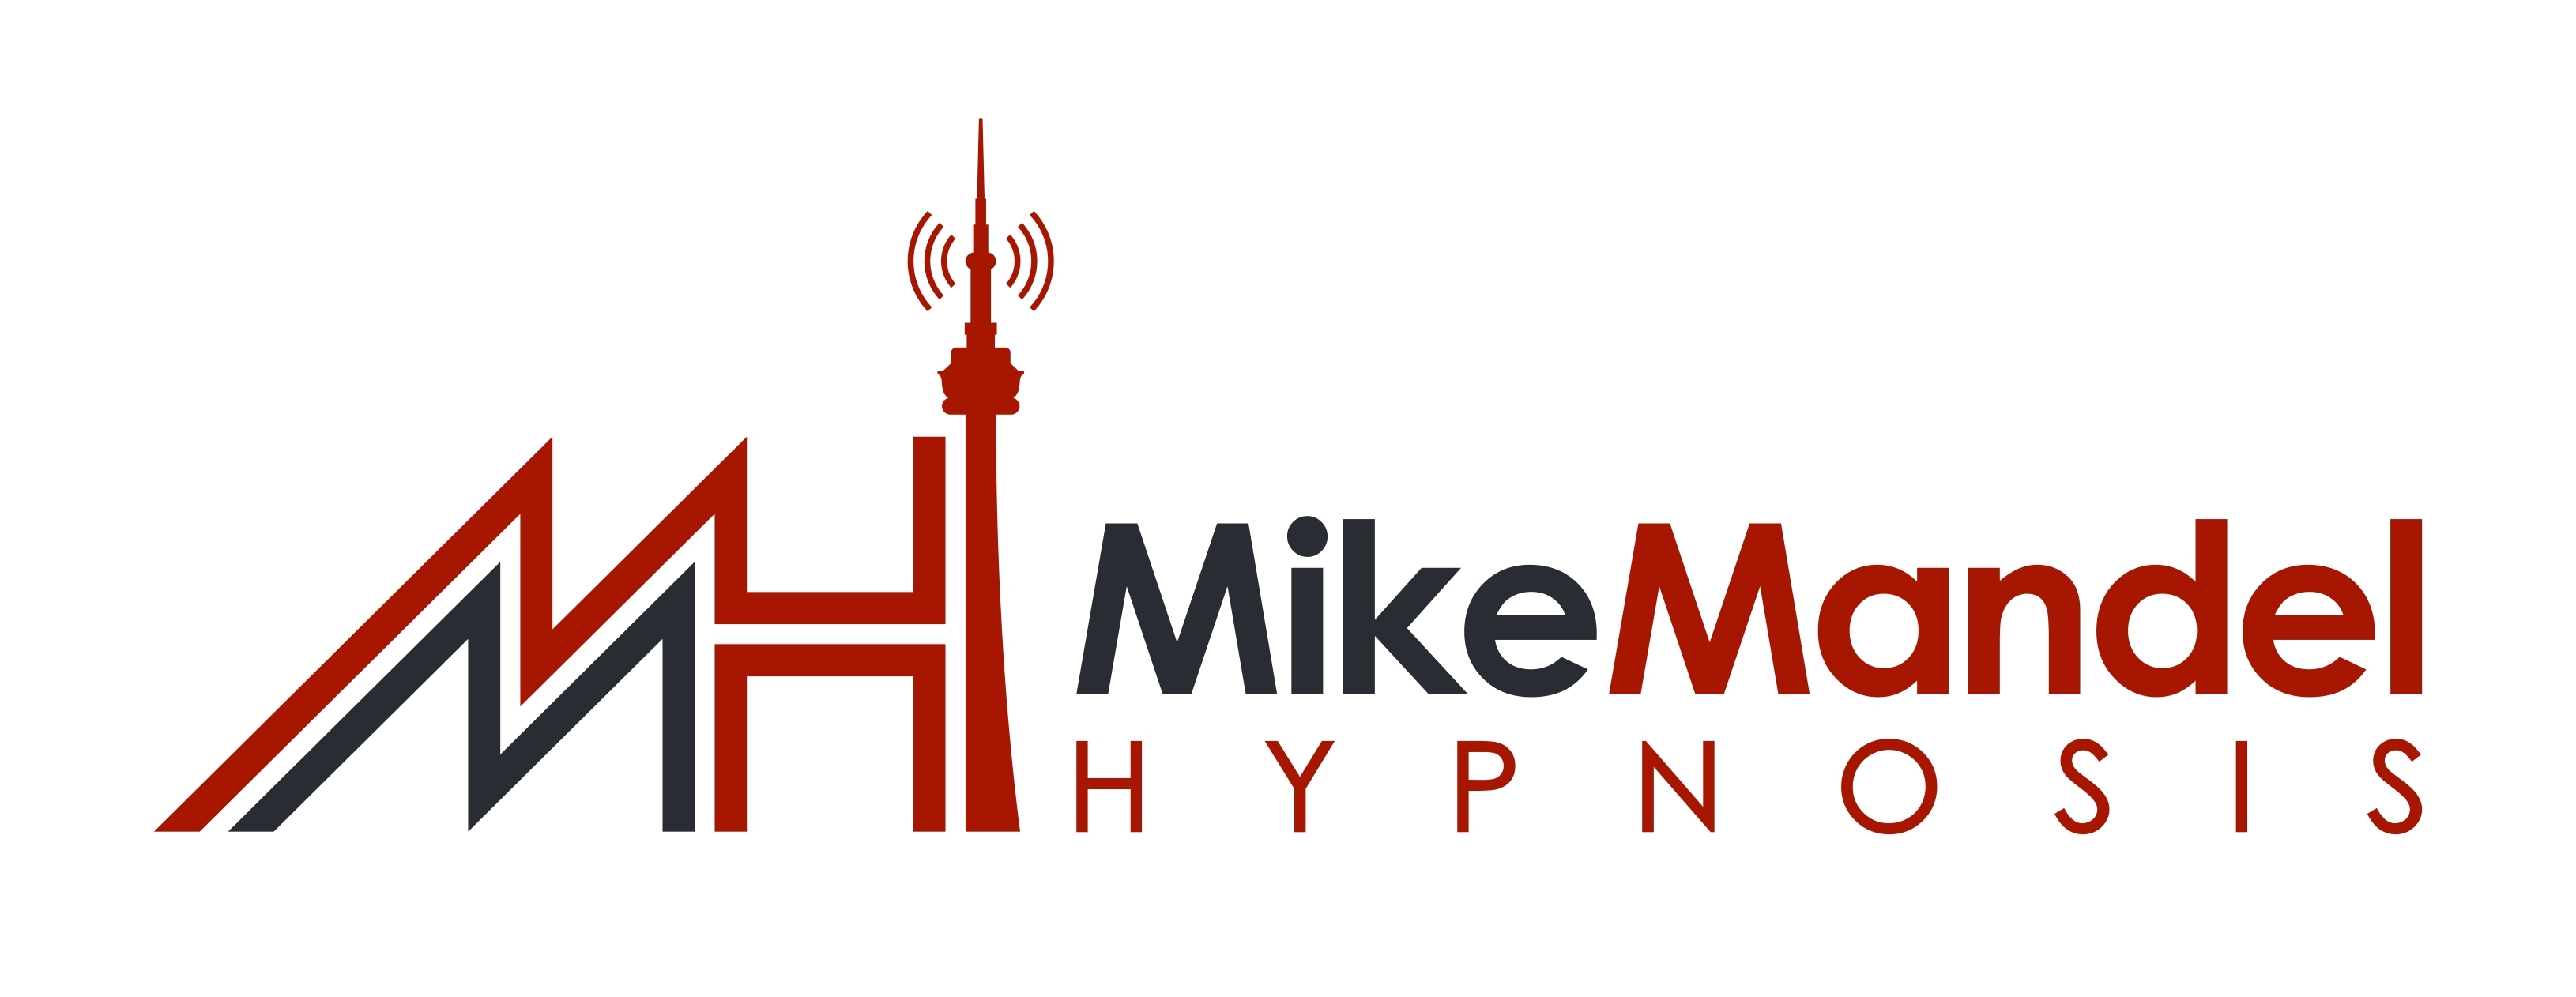 Mike Mandel Hypnosis Returning to Live Teaching with Architecture of Hypnosis Course